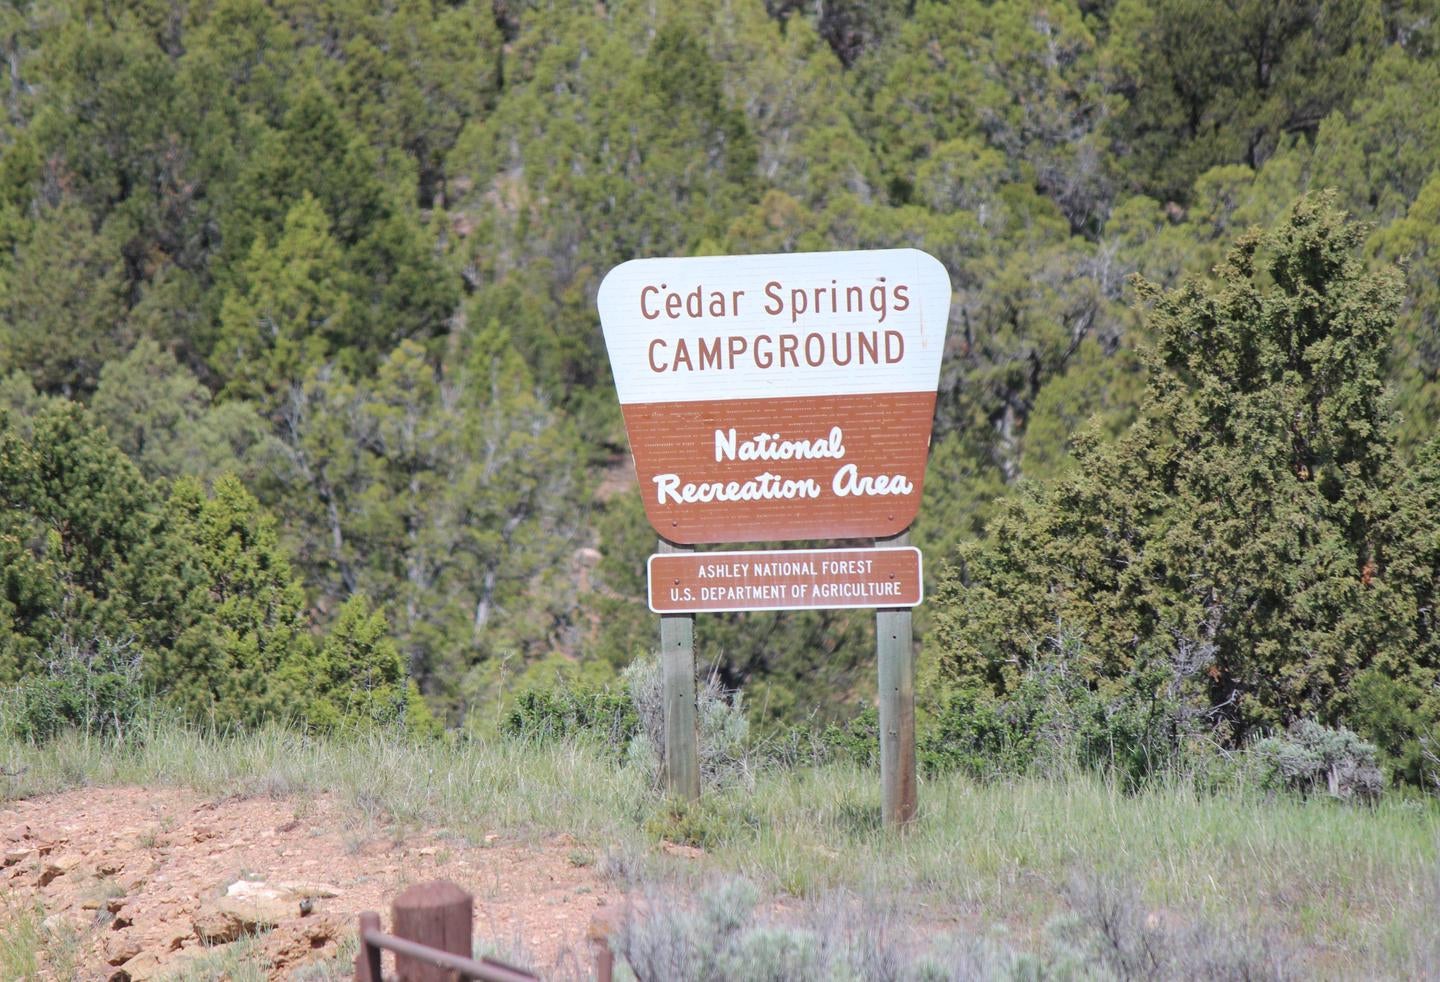 Cedar Springs Campground sign at the entrance of the campground.



Cedar Springs Campground

Credit: U.S. Forest Service